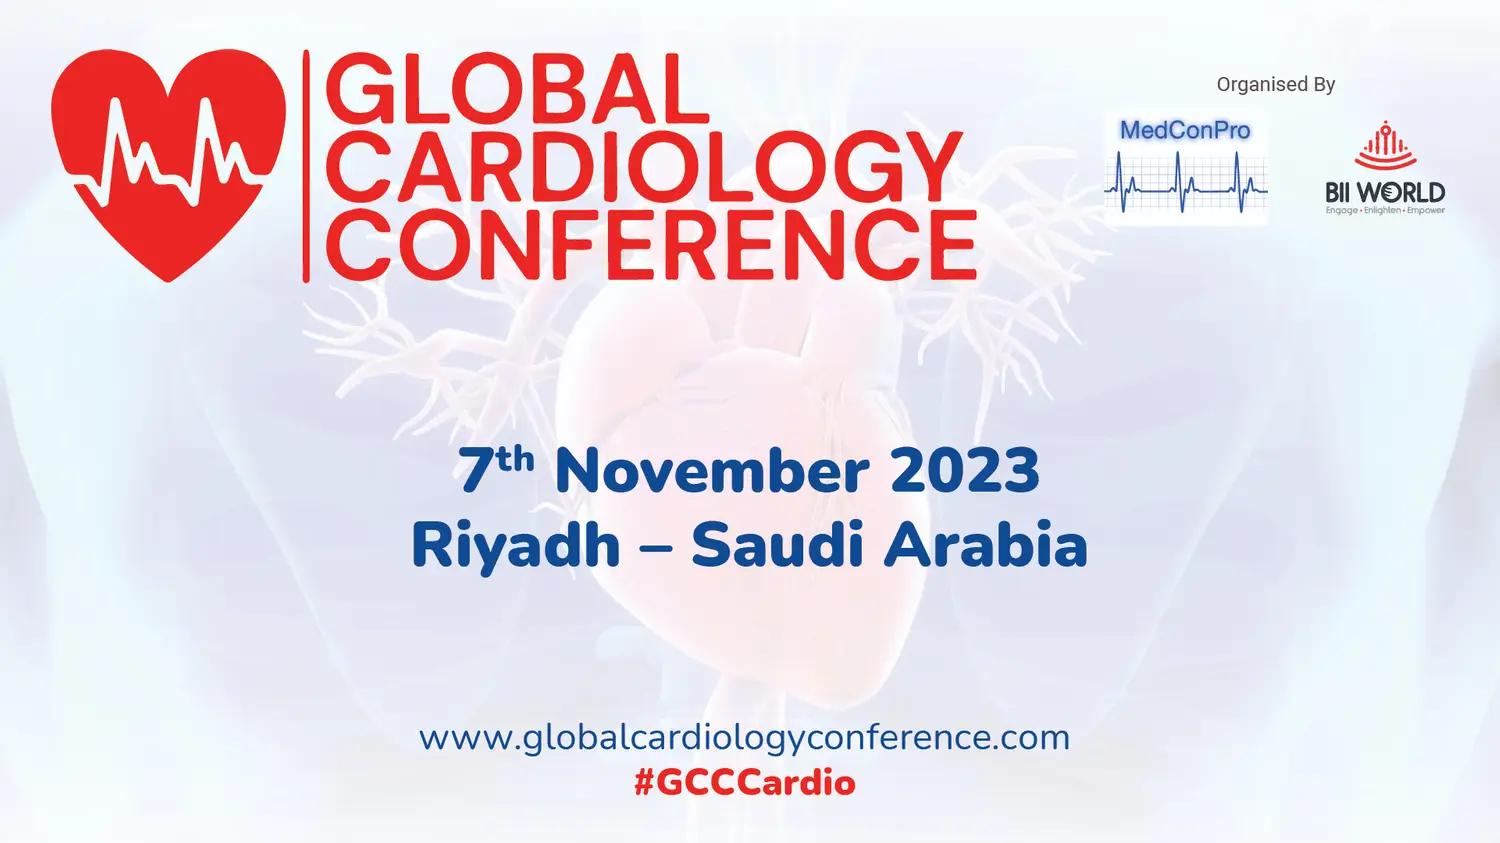 Global Cardiology Conference